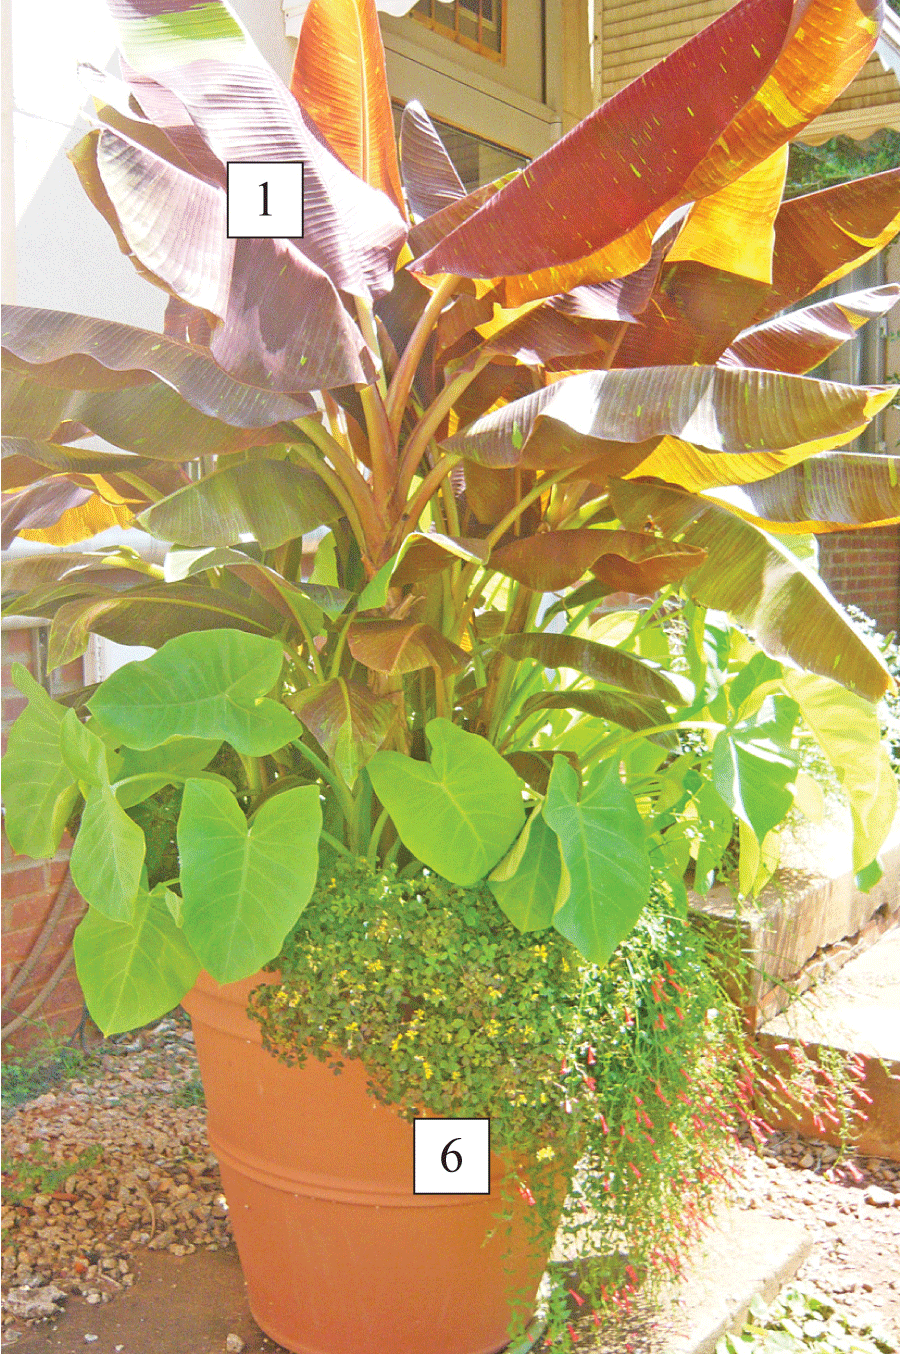 sun container with plants labeled 1 and 6, corresponding to ornamental banana and South American oxalis